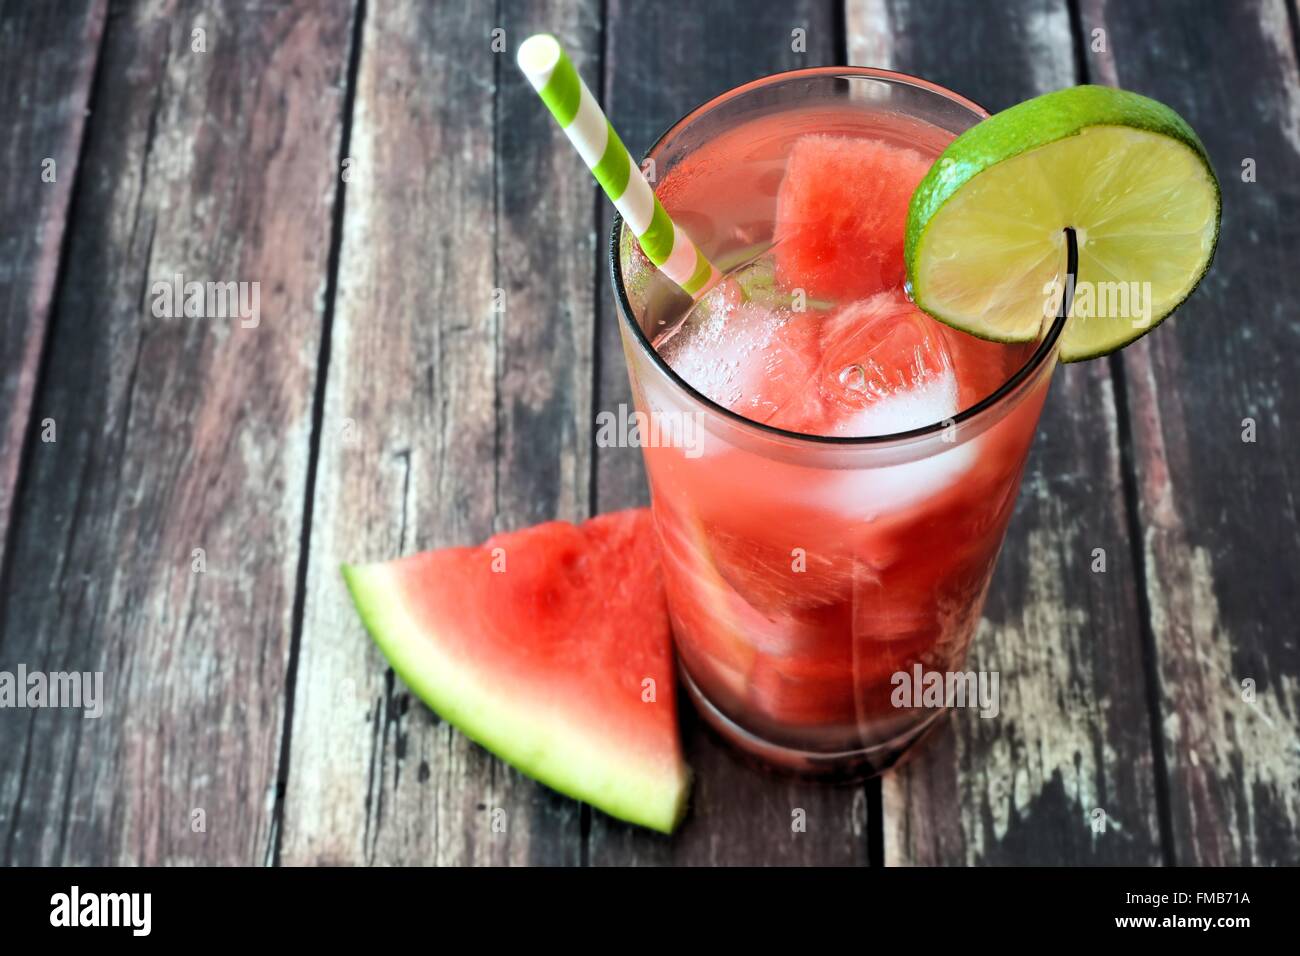 Watermelon lime water in a glass with melon slice and straw against white rustic wood background Stock Photo